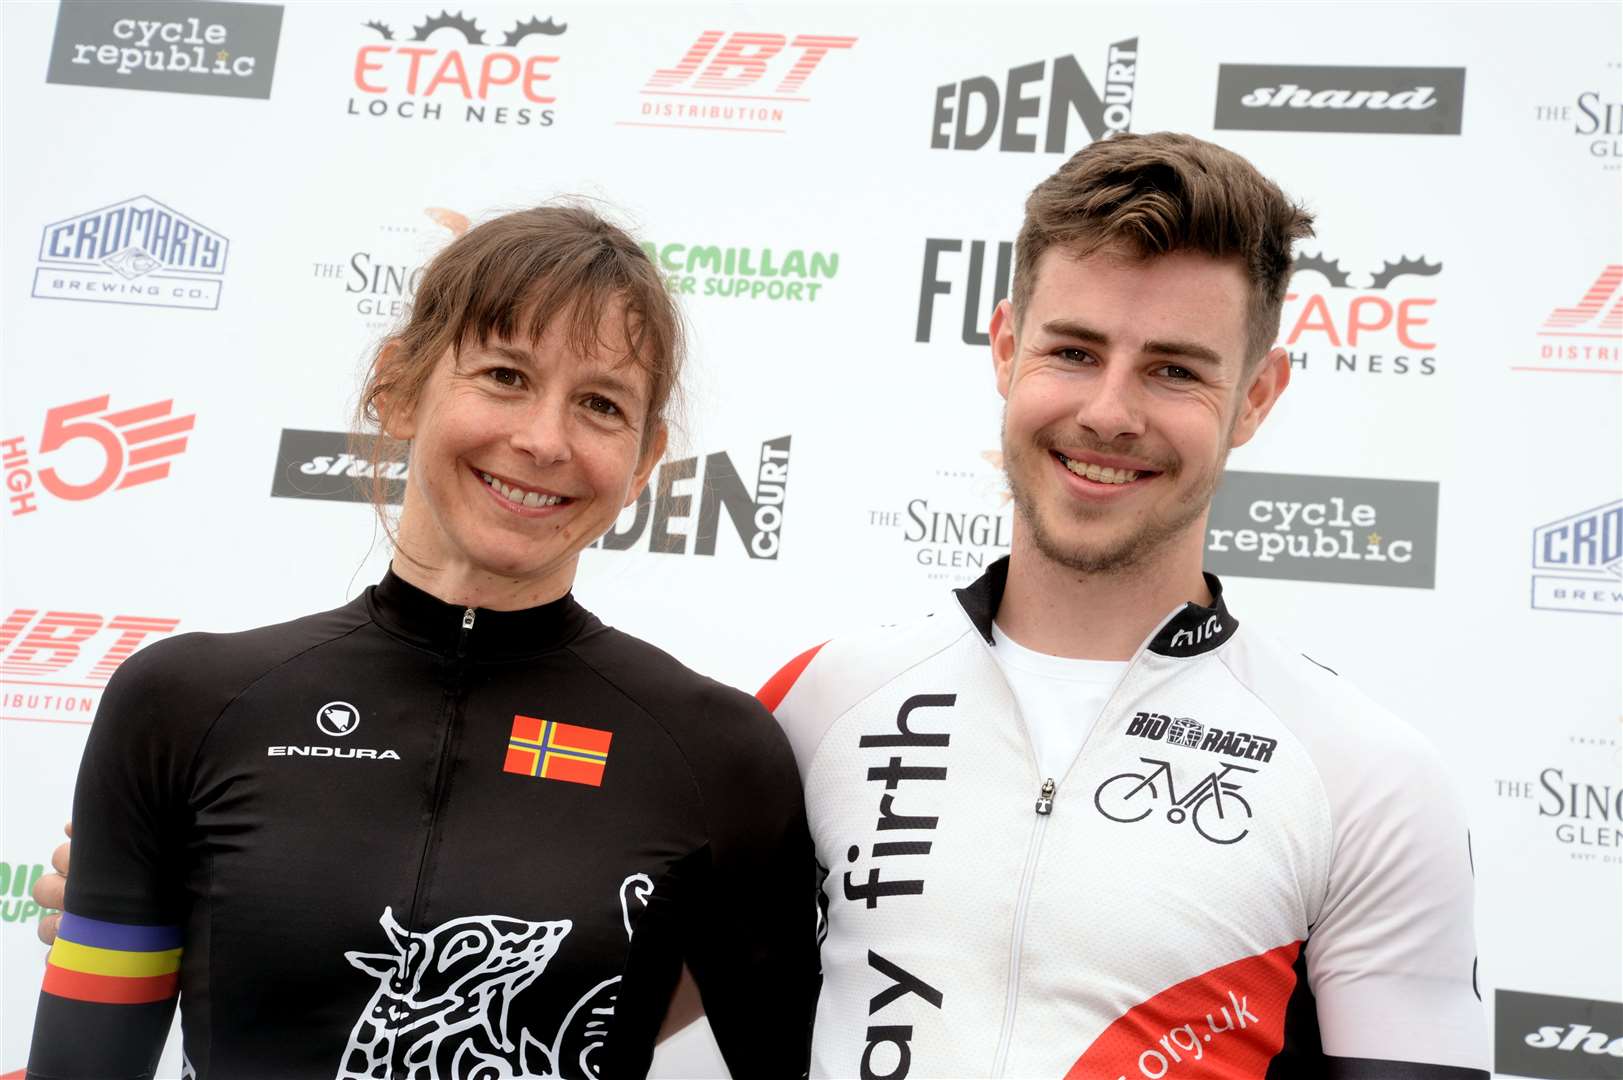 Etape Loch Ness winners Alison Leitch and Lewis Macfarlane. Picture: Gair Fraser